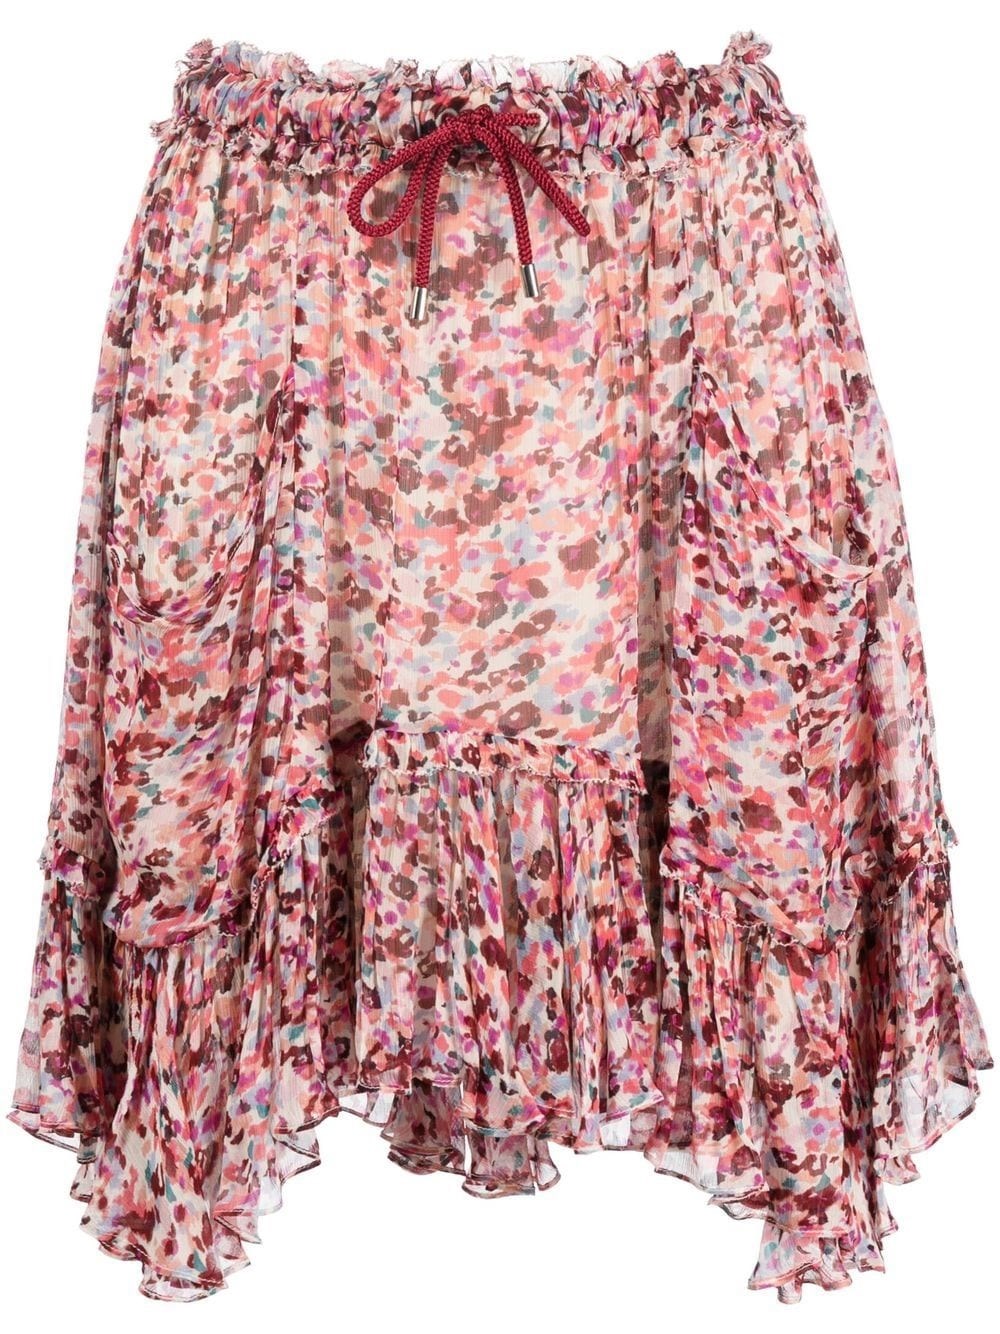 ISABEL MARANT ÉTOILE GEORGETTE SKIRT WITH PRINT